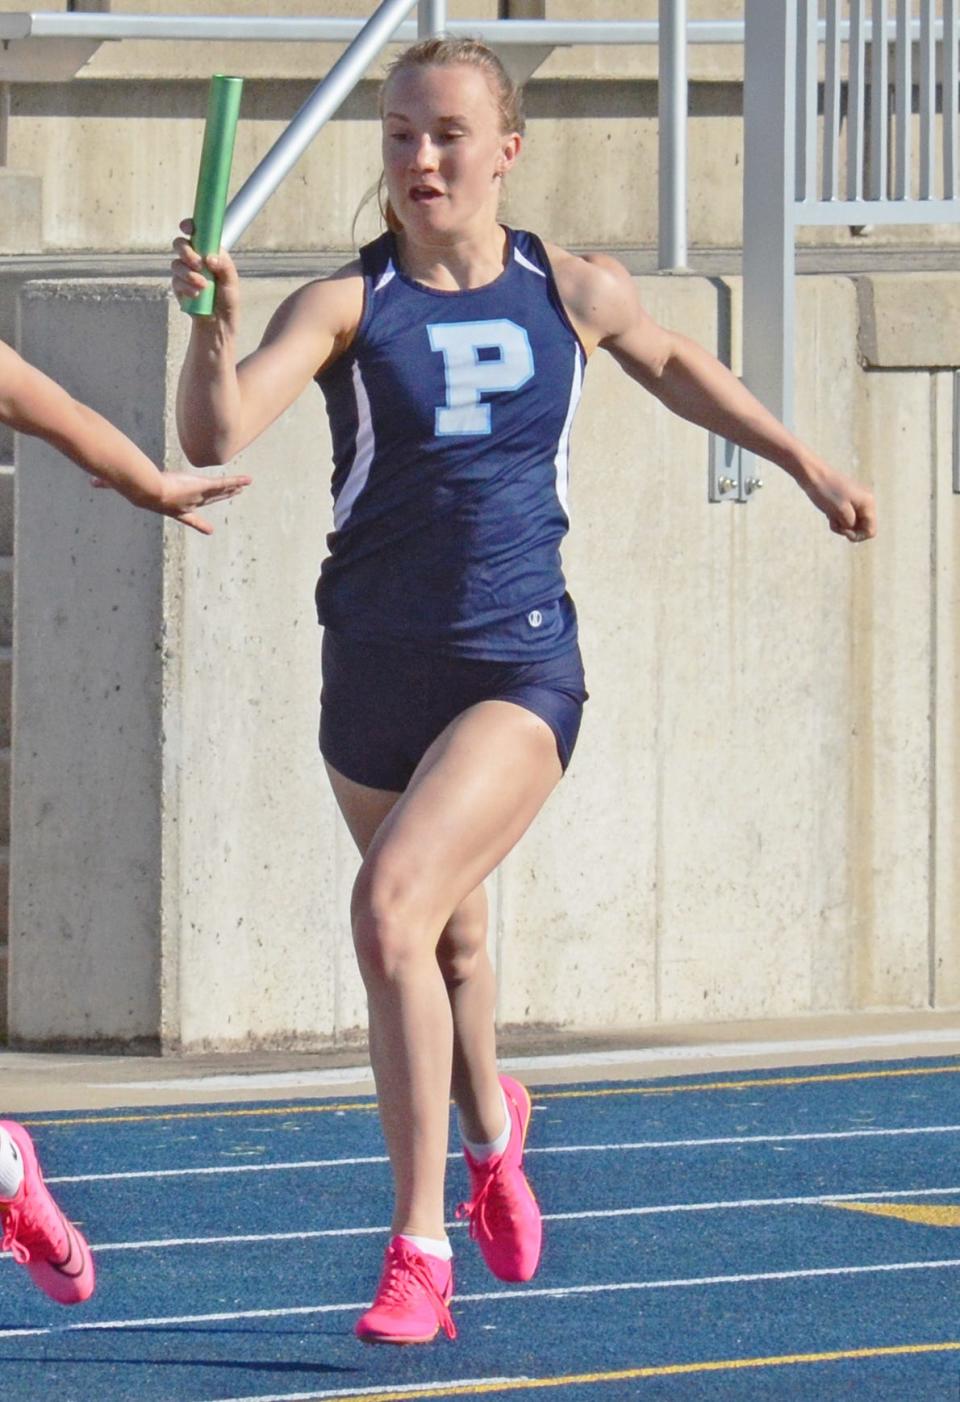 Petoskey's Madeline Loe was part of a record-breaking performance in the 4x200 meter relay, along with Gretchen Woodbury, Alison Bailey and Naveah Leonard.